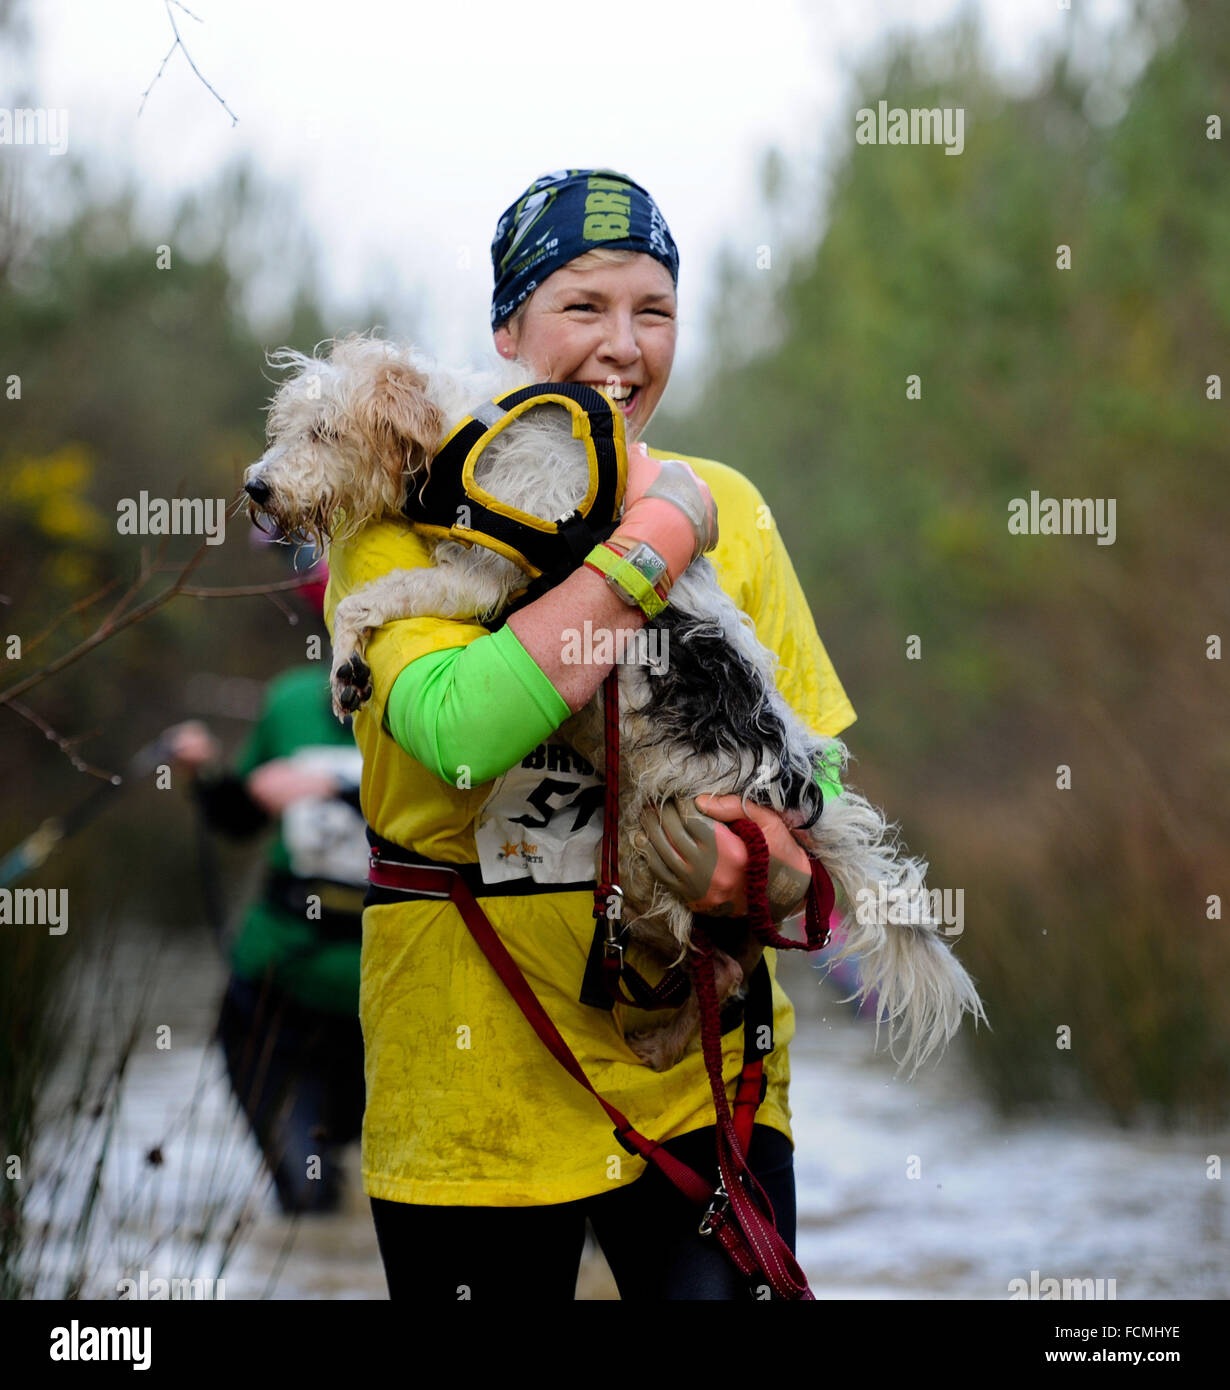 Aldershot, Hants, UK. 23rd January, 2016. Participants of the Brutal women only  10km canicross race at Long valley Aldershot Hampshire are forced to carry their dogs  and break the ice as the streams and puddles overflow due to the recent bad weather.  The recent weather made the Brutal 10km off road course live up to its name as the puddles and streams where up to waste height in many places with early runners having to break the ice as they entered the water.  Credit:  PBWPIX/Alamy Live News Stock Photo